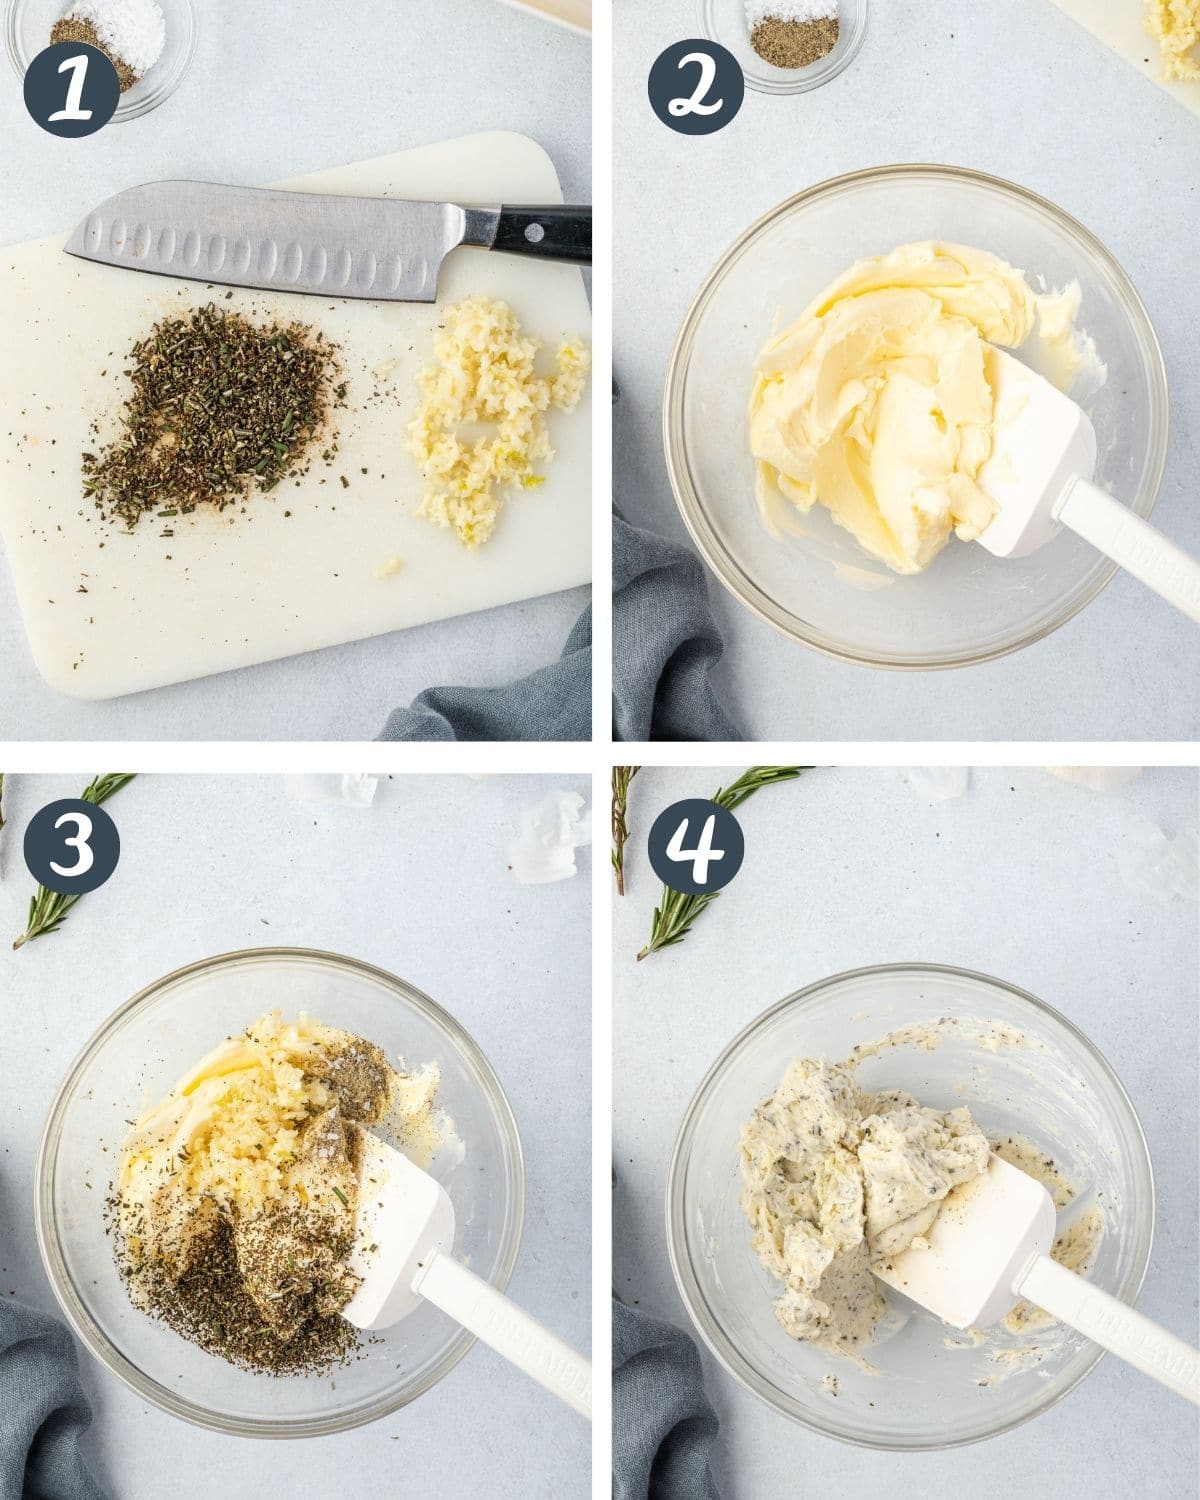 Collage showing garlic butter process - mincing herbs and mixing into butter.